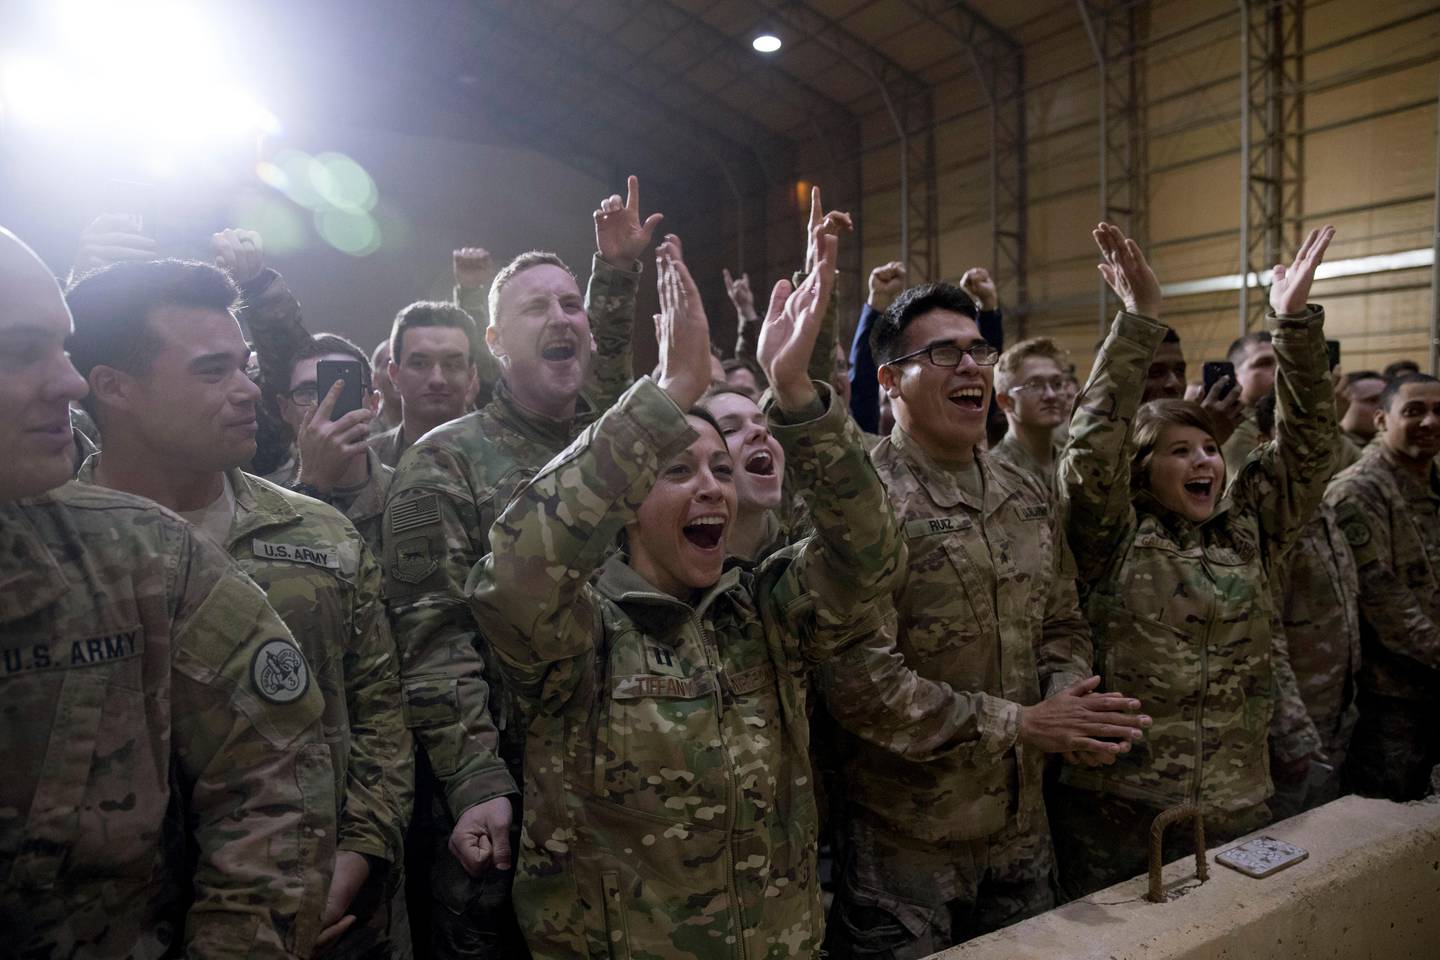 Members of the military cheer as President Donald Trump speaks at a hangar rally at Al Asad Air Base, Iraq, Wednesday, Dec. 26, 2018. President Donald Trump, who is visiting Iraq, says he has 'no plans at all' to remove US troops from the country.  (AP Photo/Andrew Harnik)